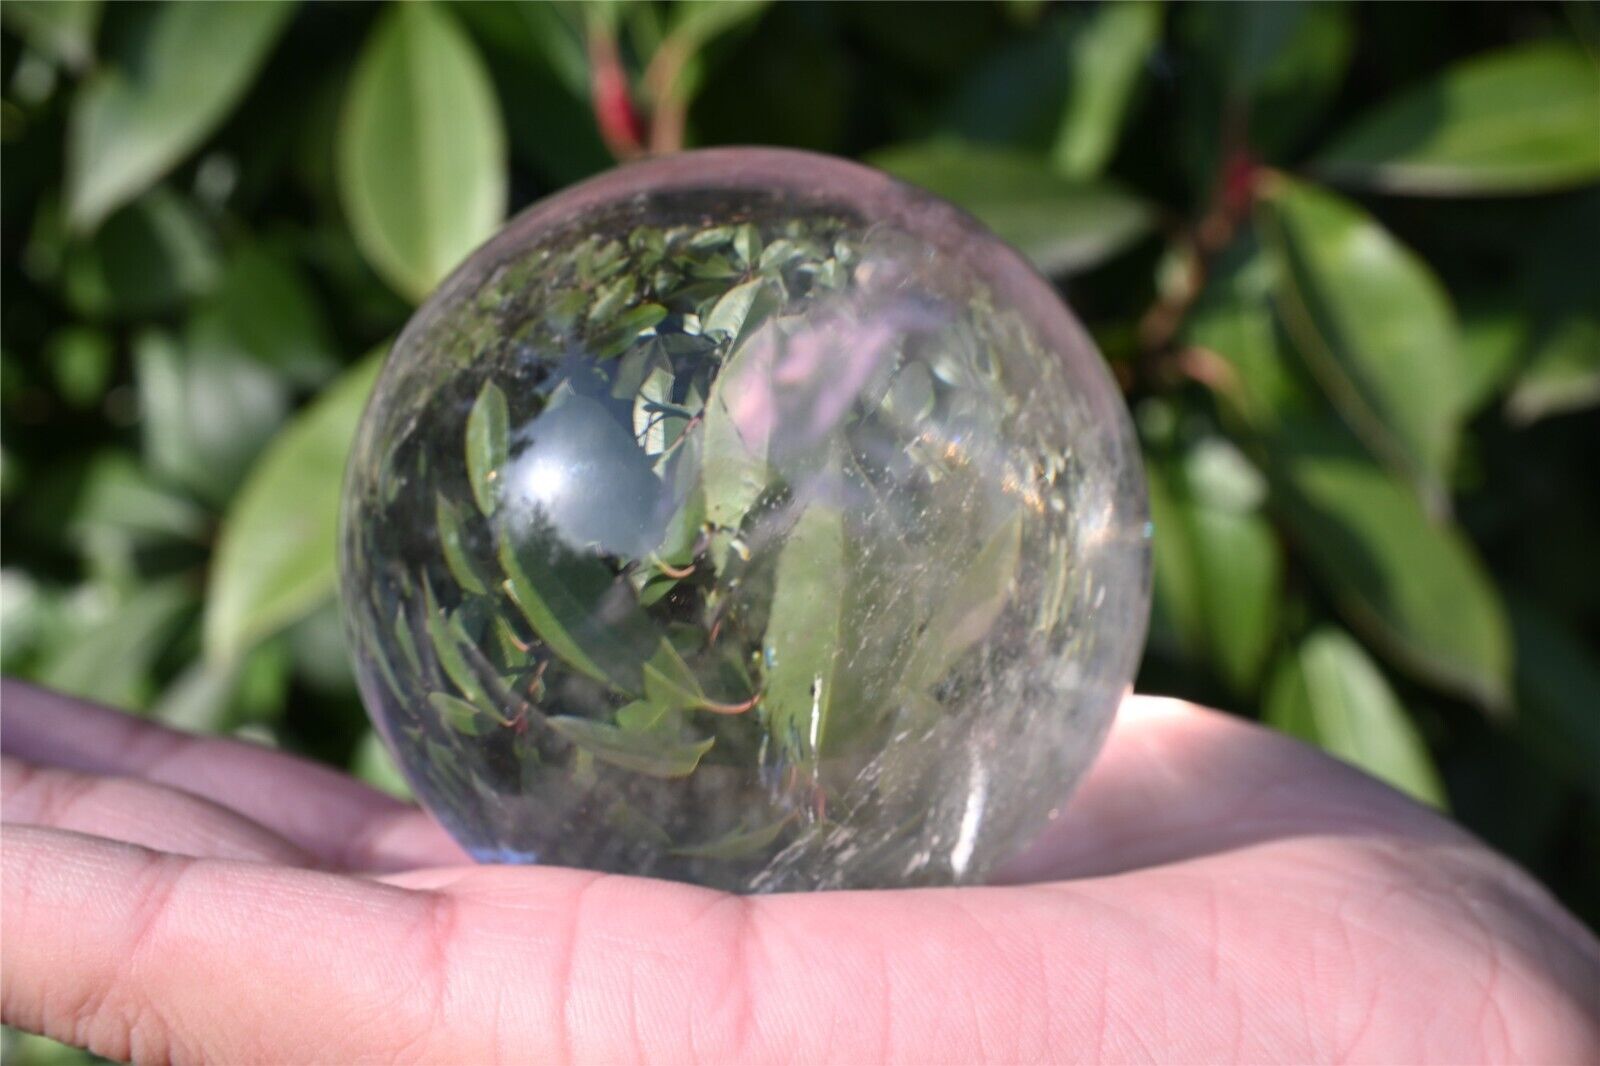 0.66LB TOPNatural clear quartz ball carved crystal sphere decoration healing